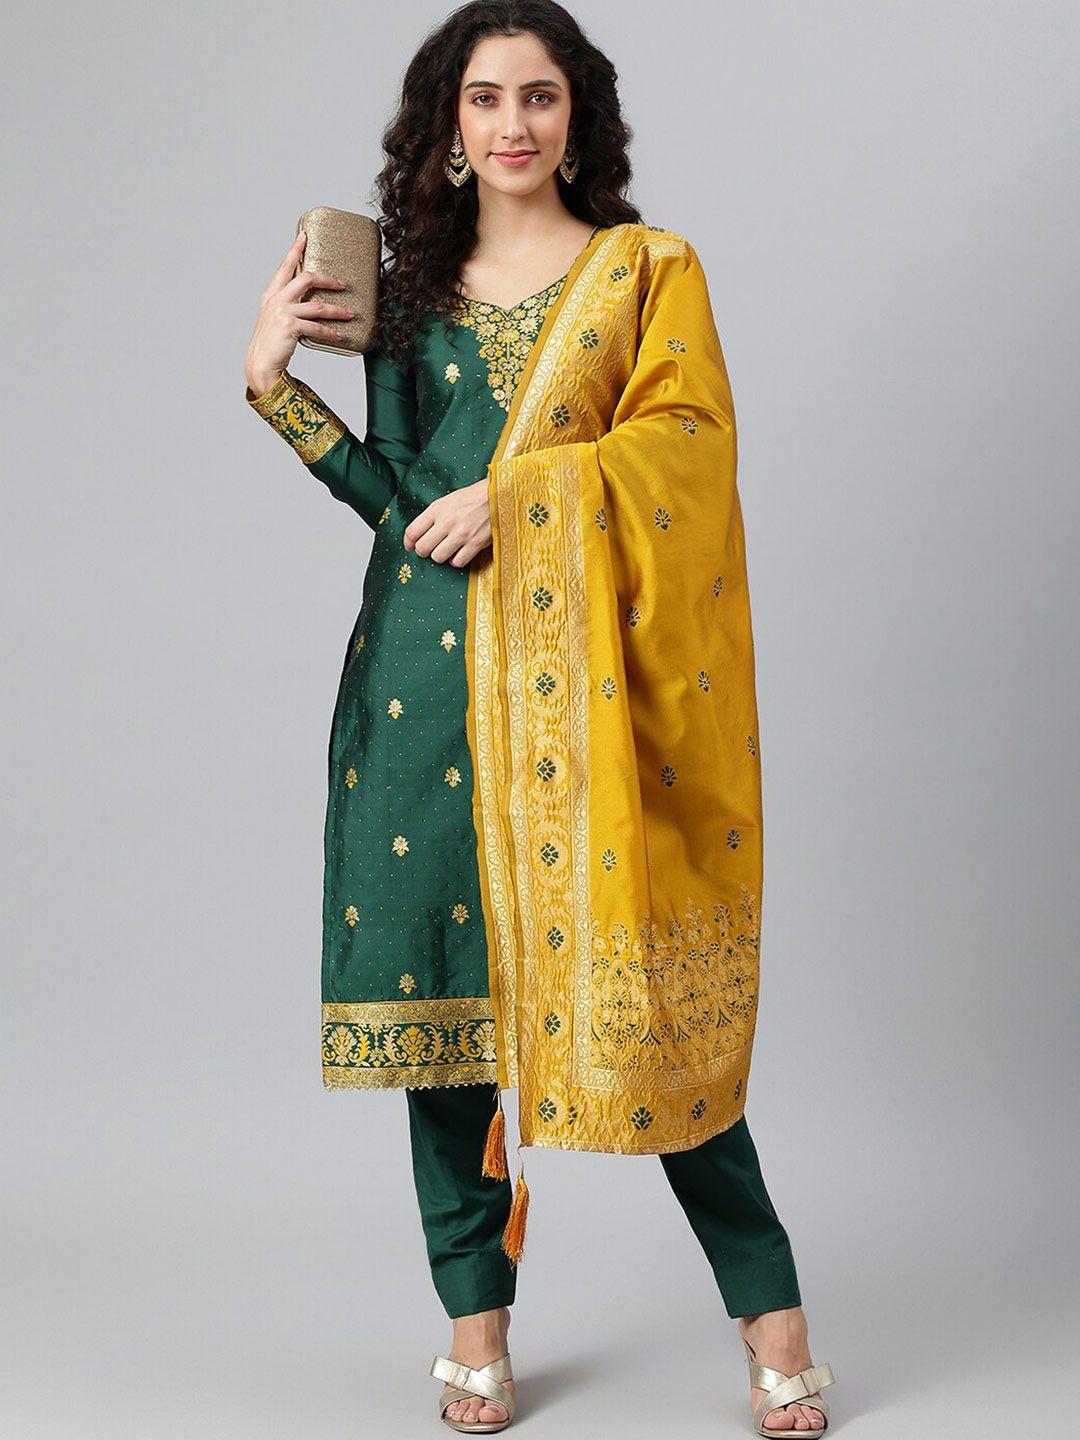 Lilots Green & Gold-Toned Unstitched Dress Material